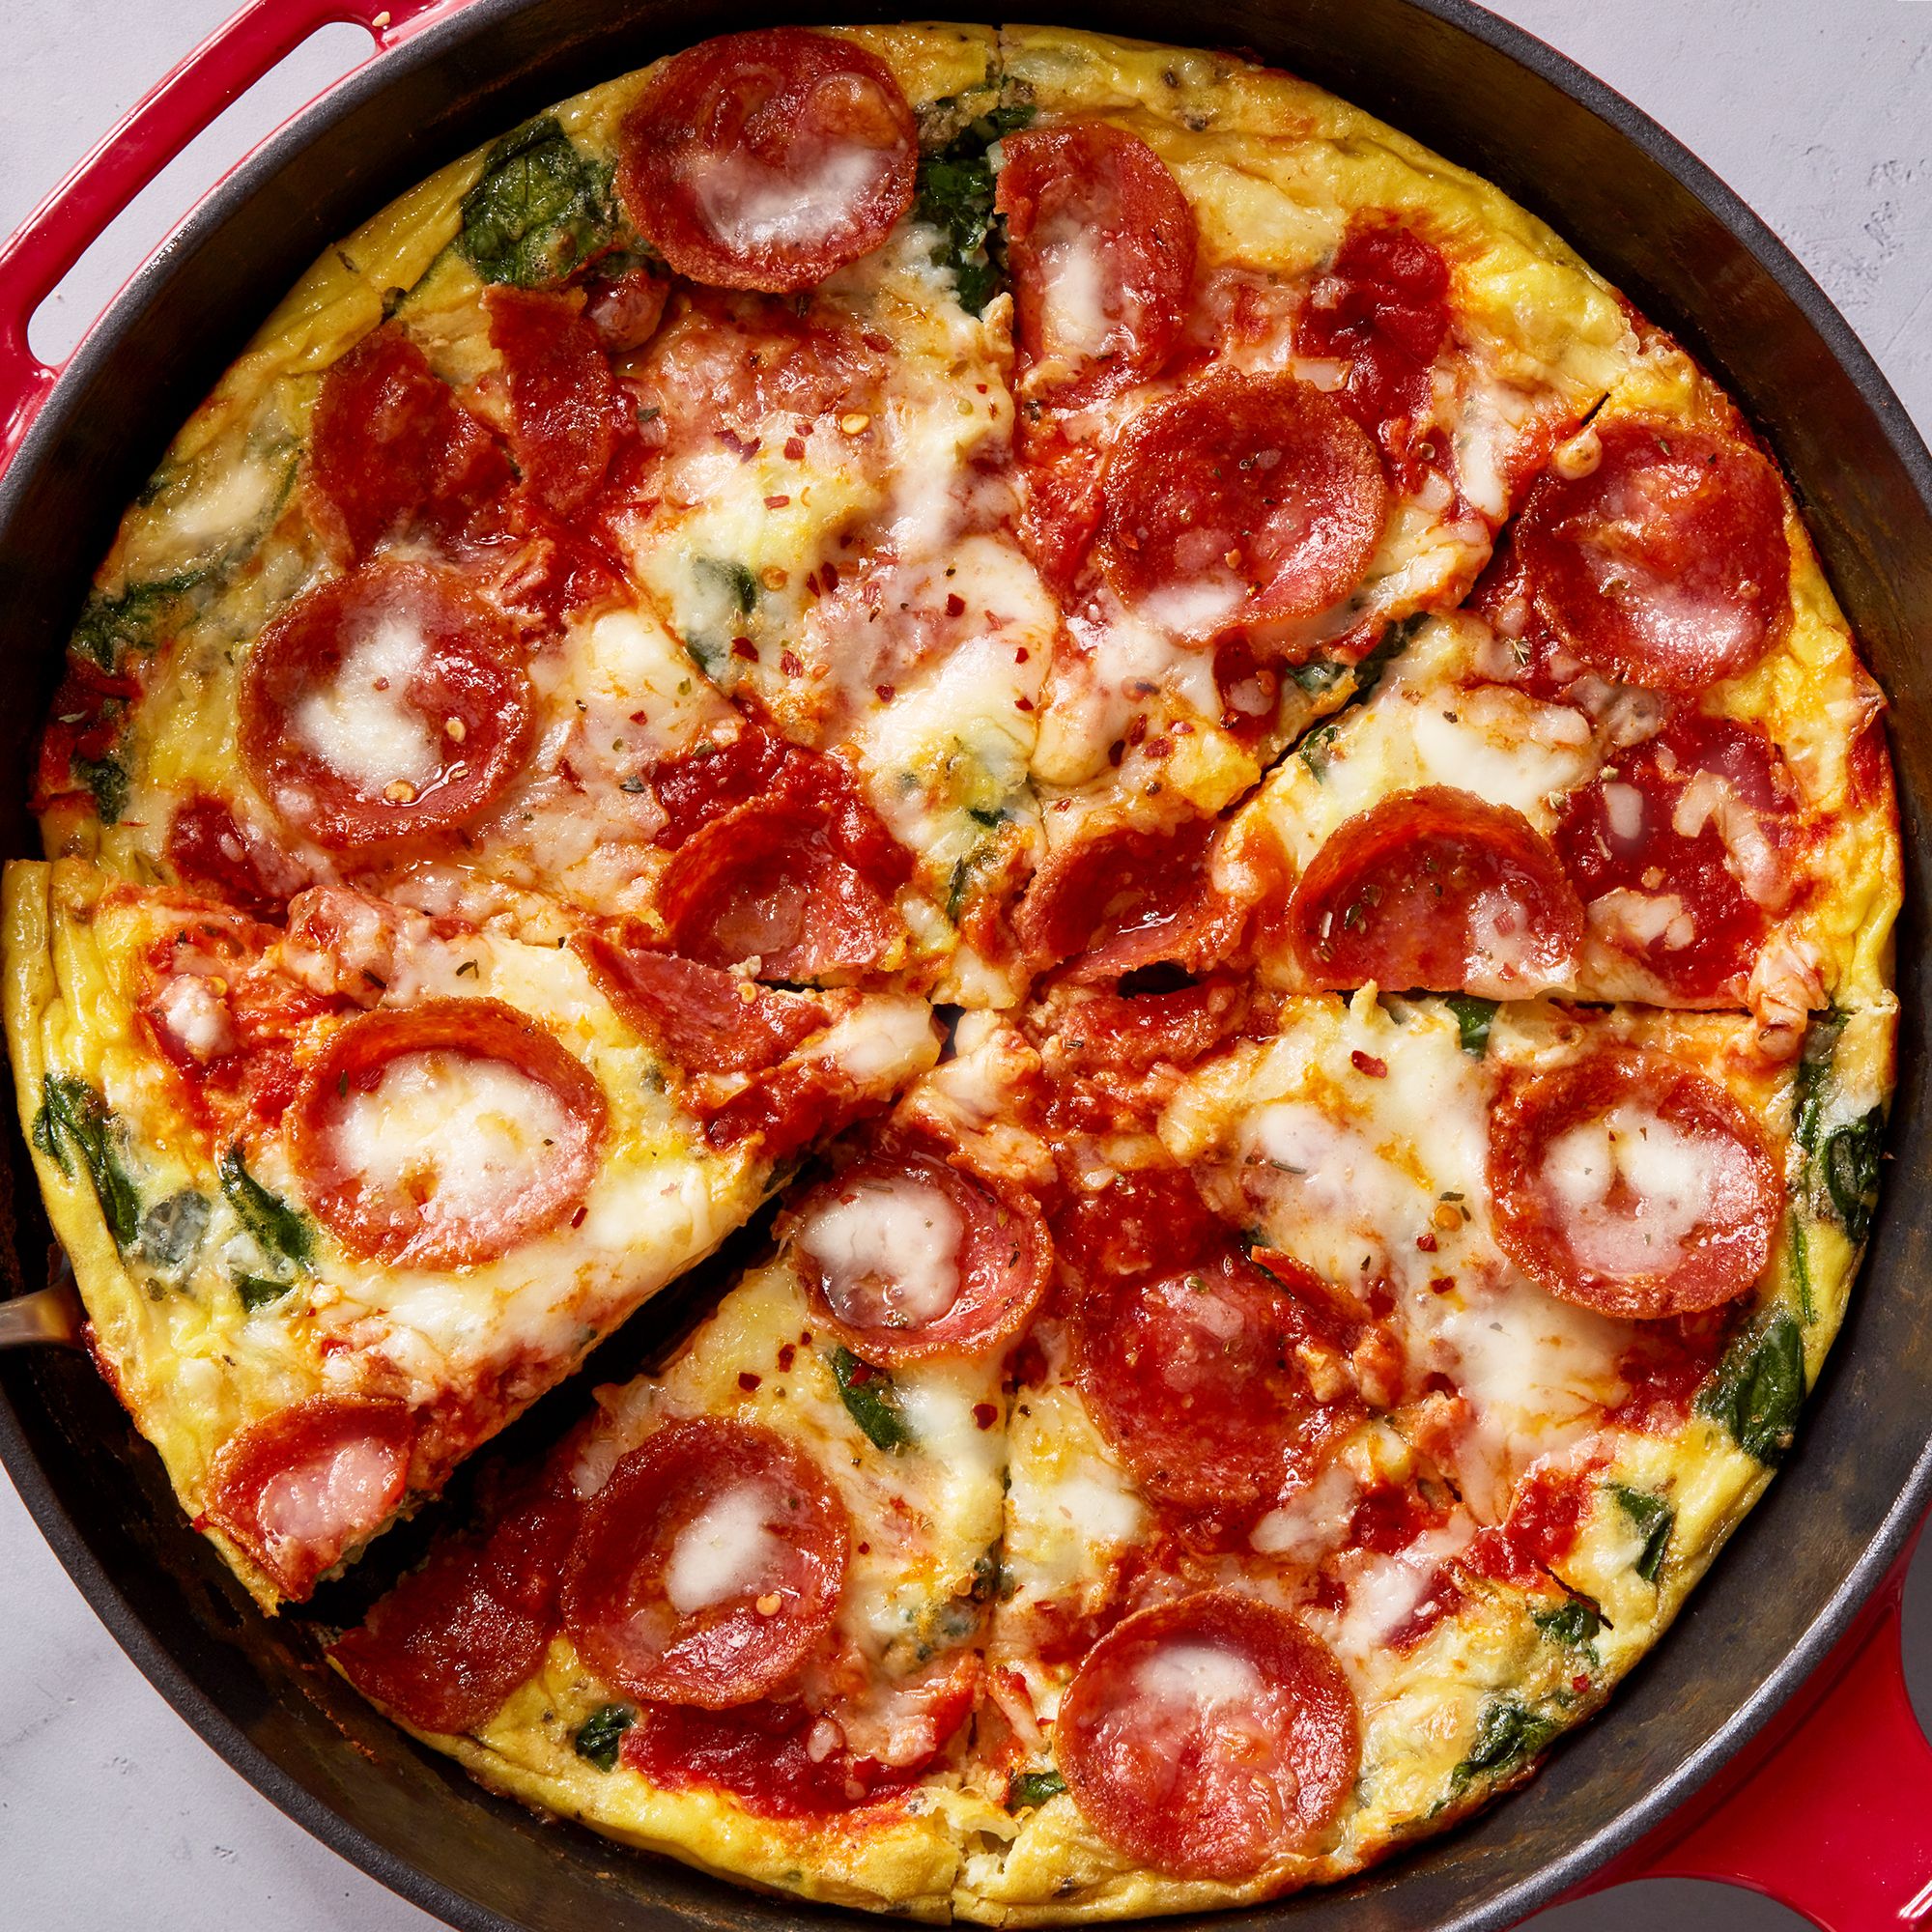 Cast-Iron Skillet Pizza with Sausage & Kale